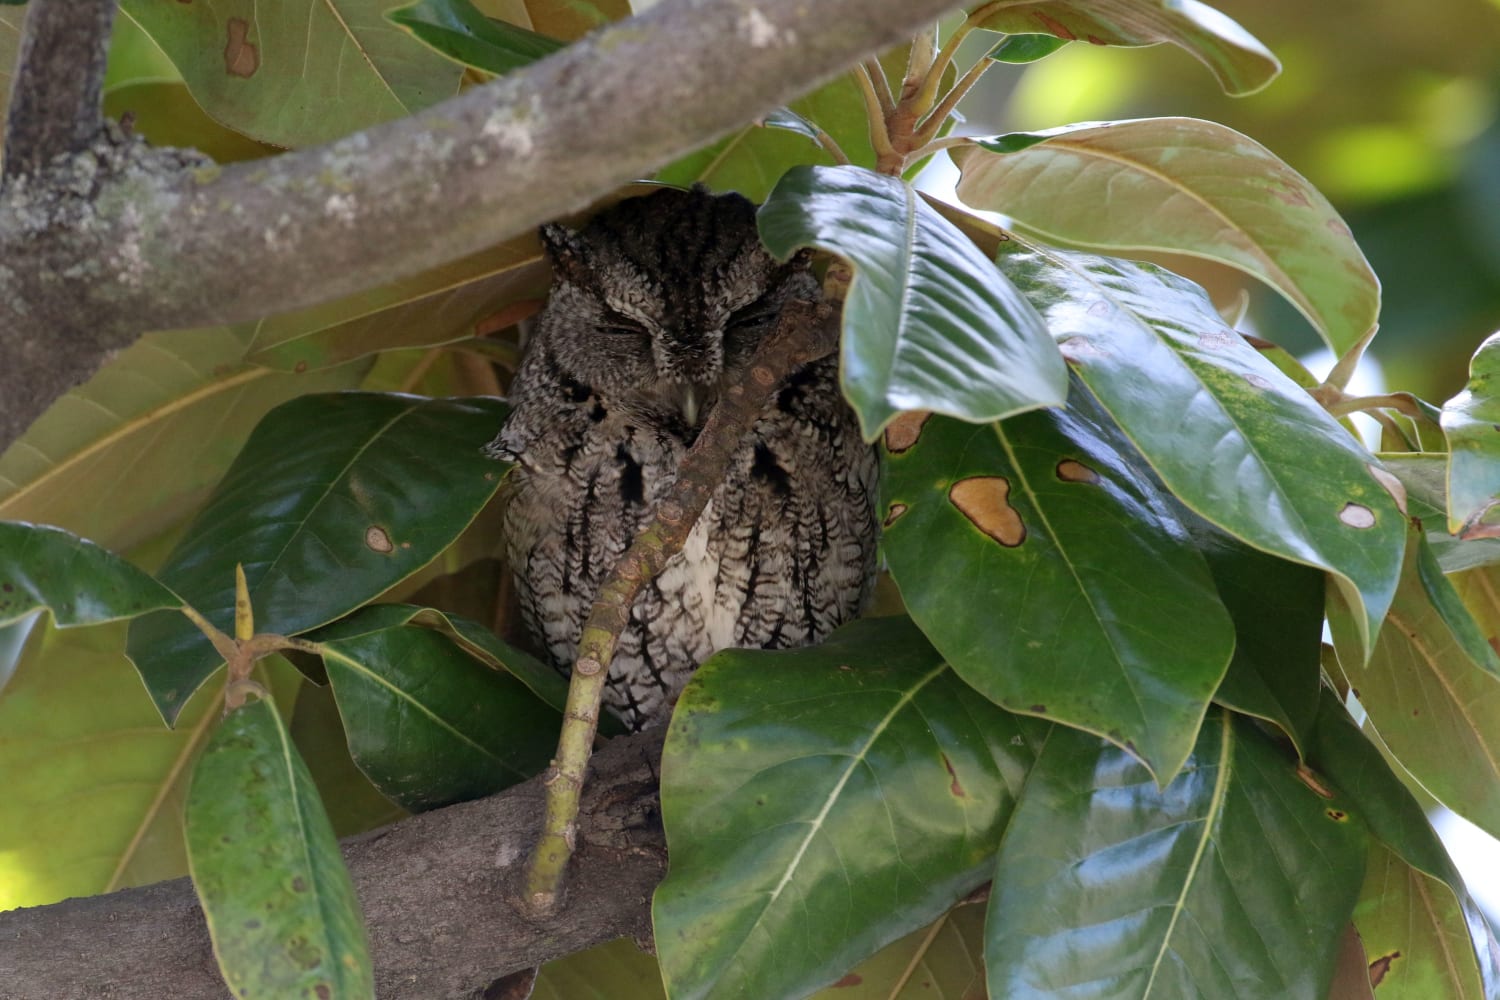 Eastern Screech Owl Hiding In a Magnolia Tree. (Male stays in this tree during the day near the female who is brooding in the box/nest.)